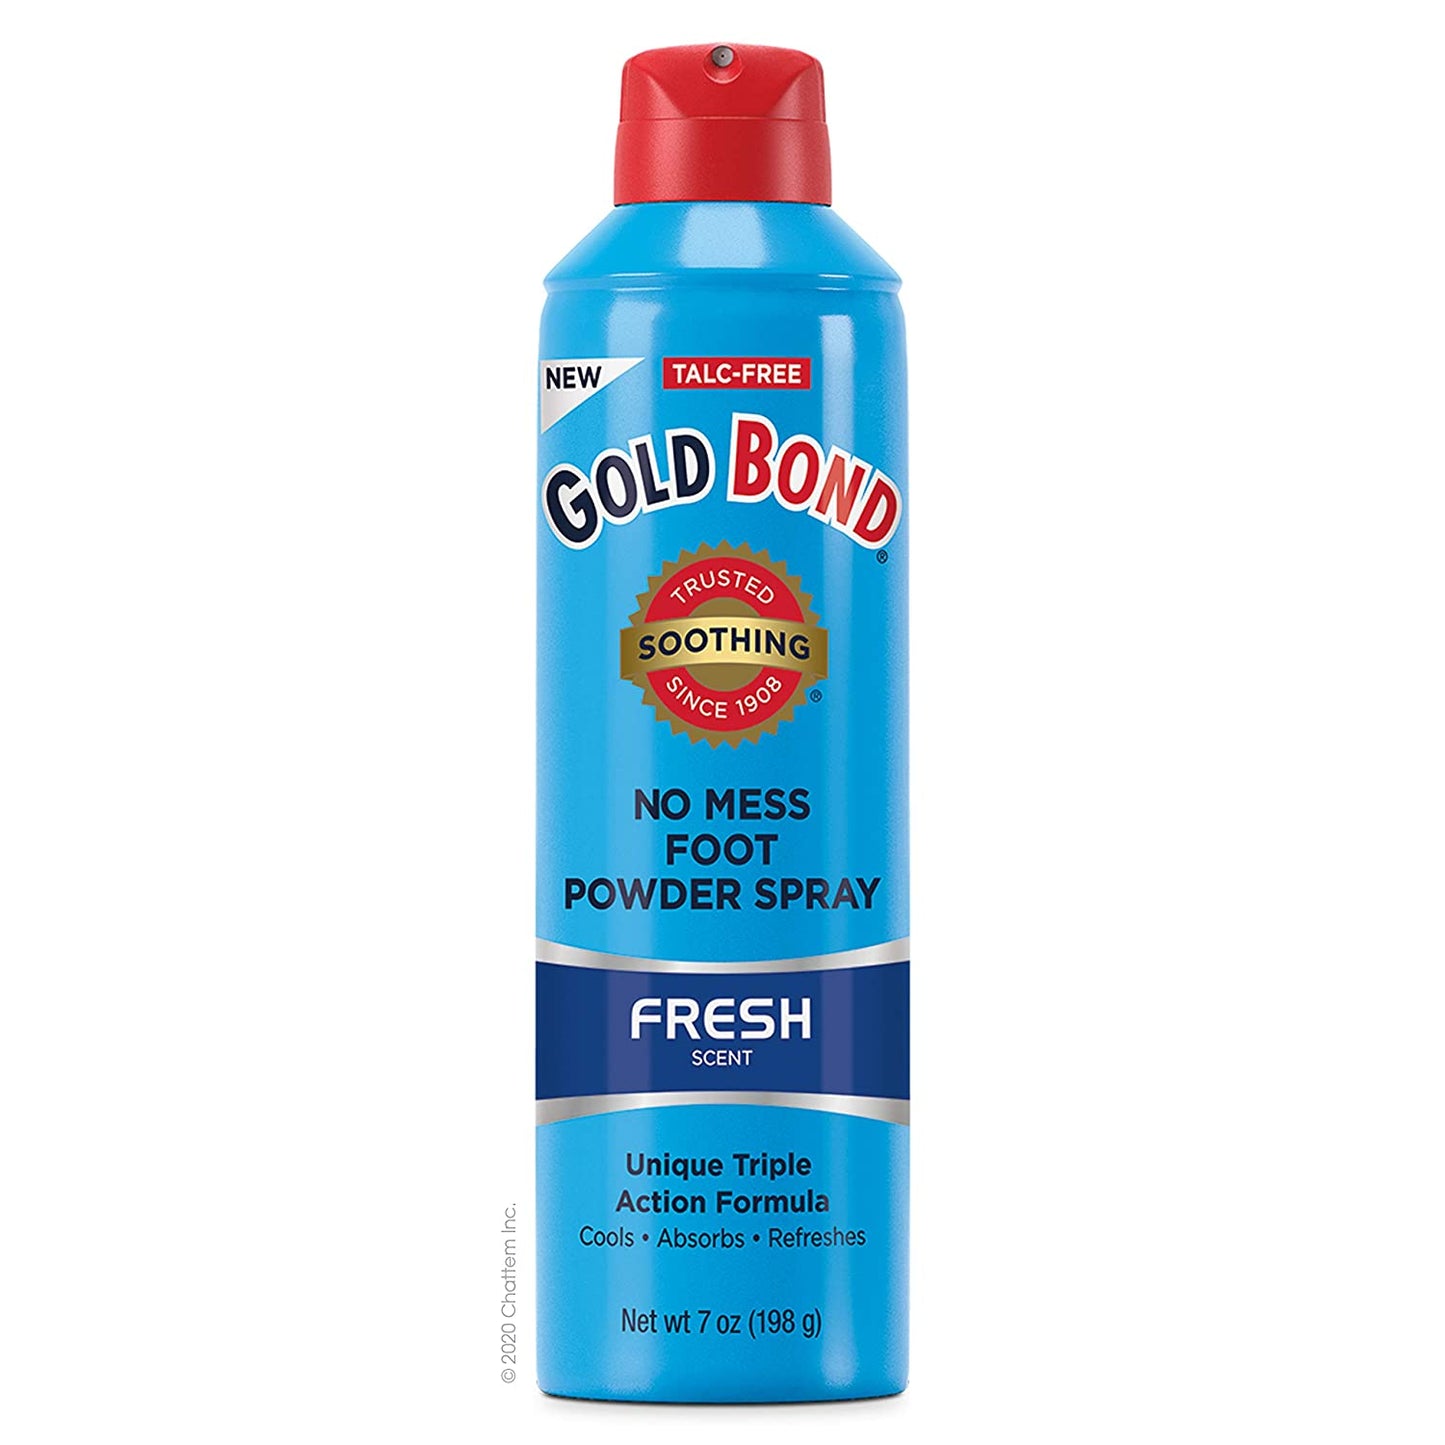 Gold Bond Soothing No Mess Foot Powder Spray with Unique Triple Action Formula Fresh Scent, 7 oz. / 198g